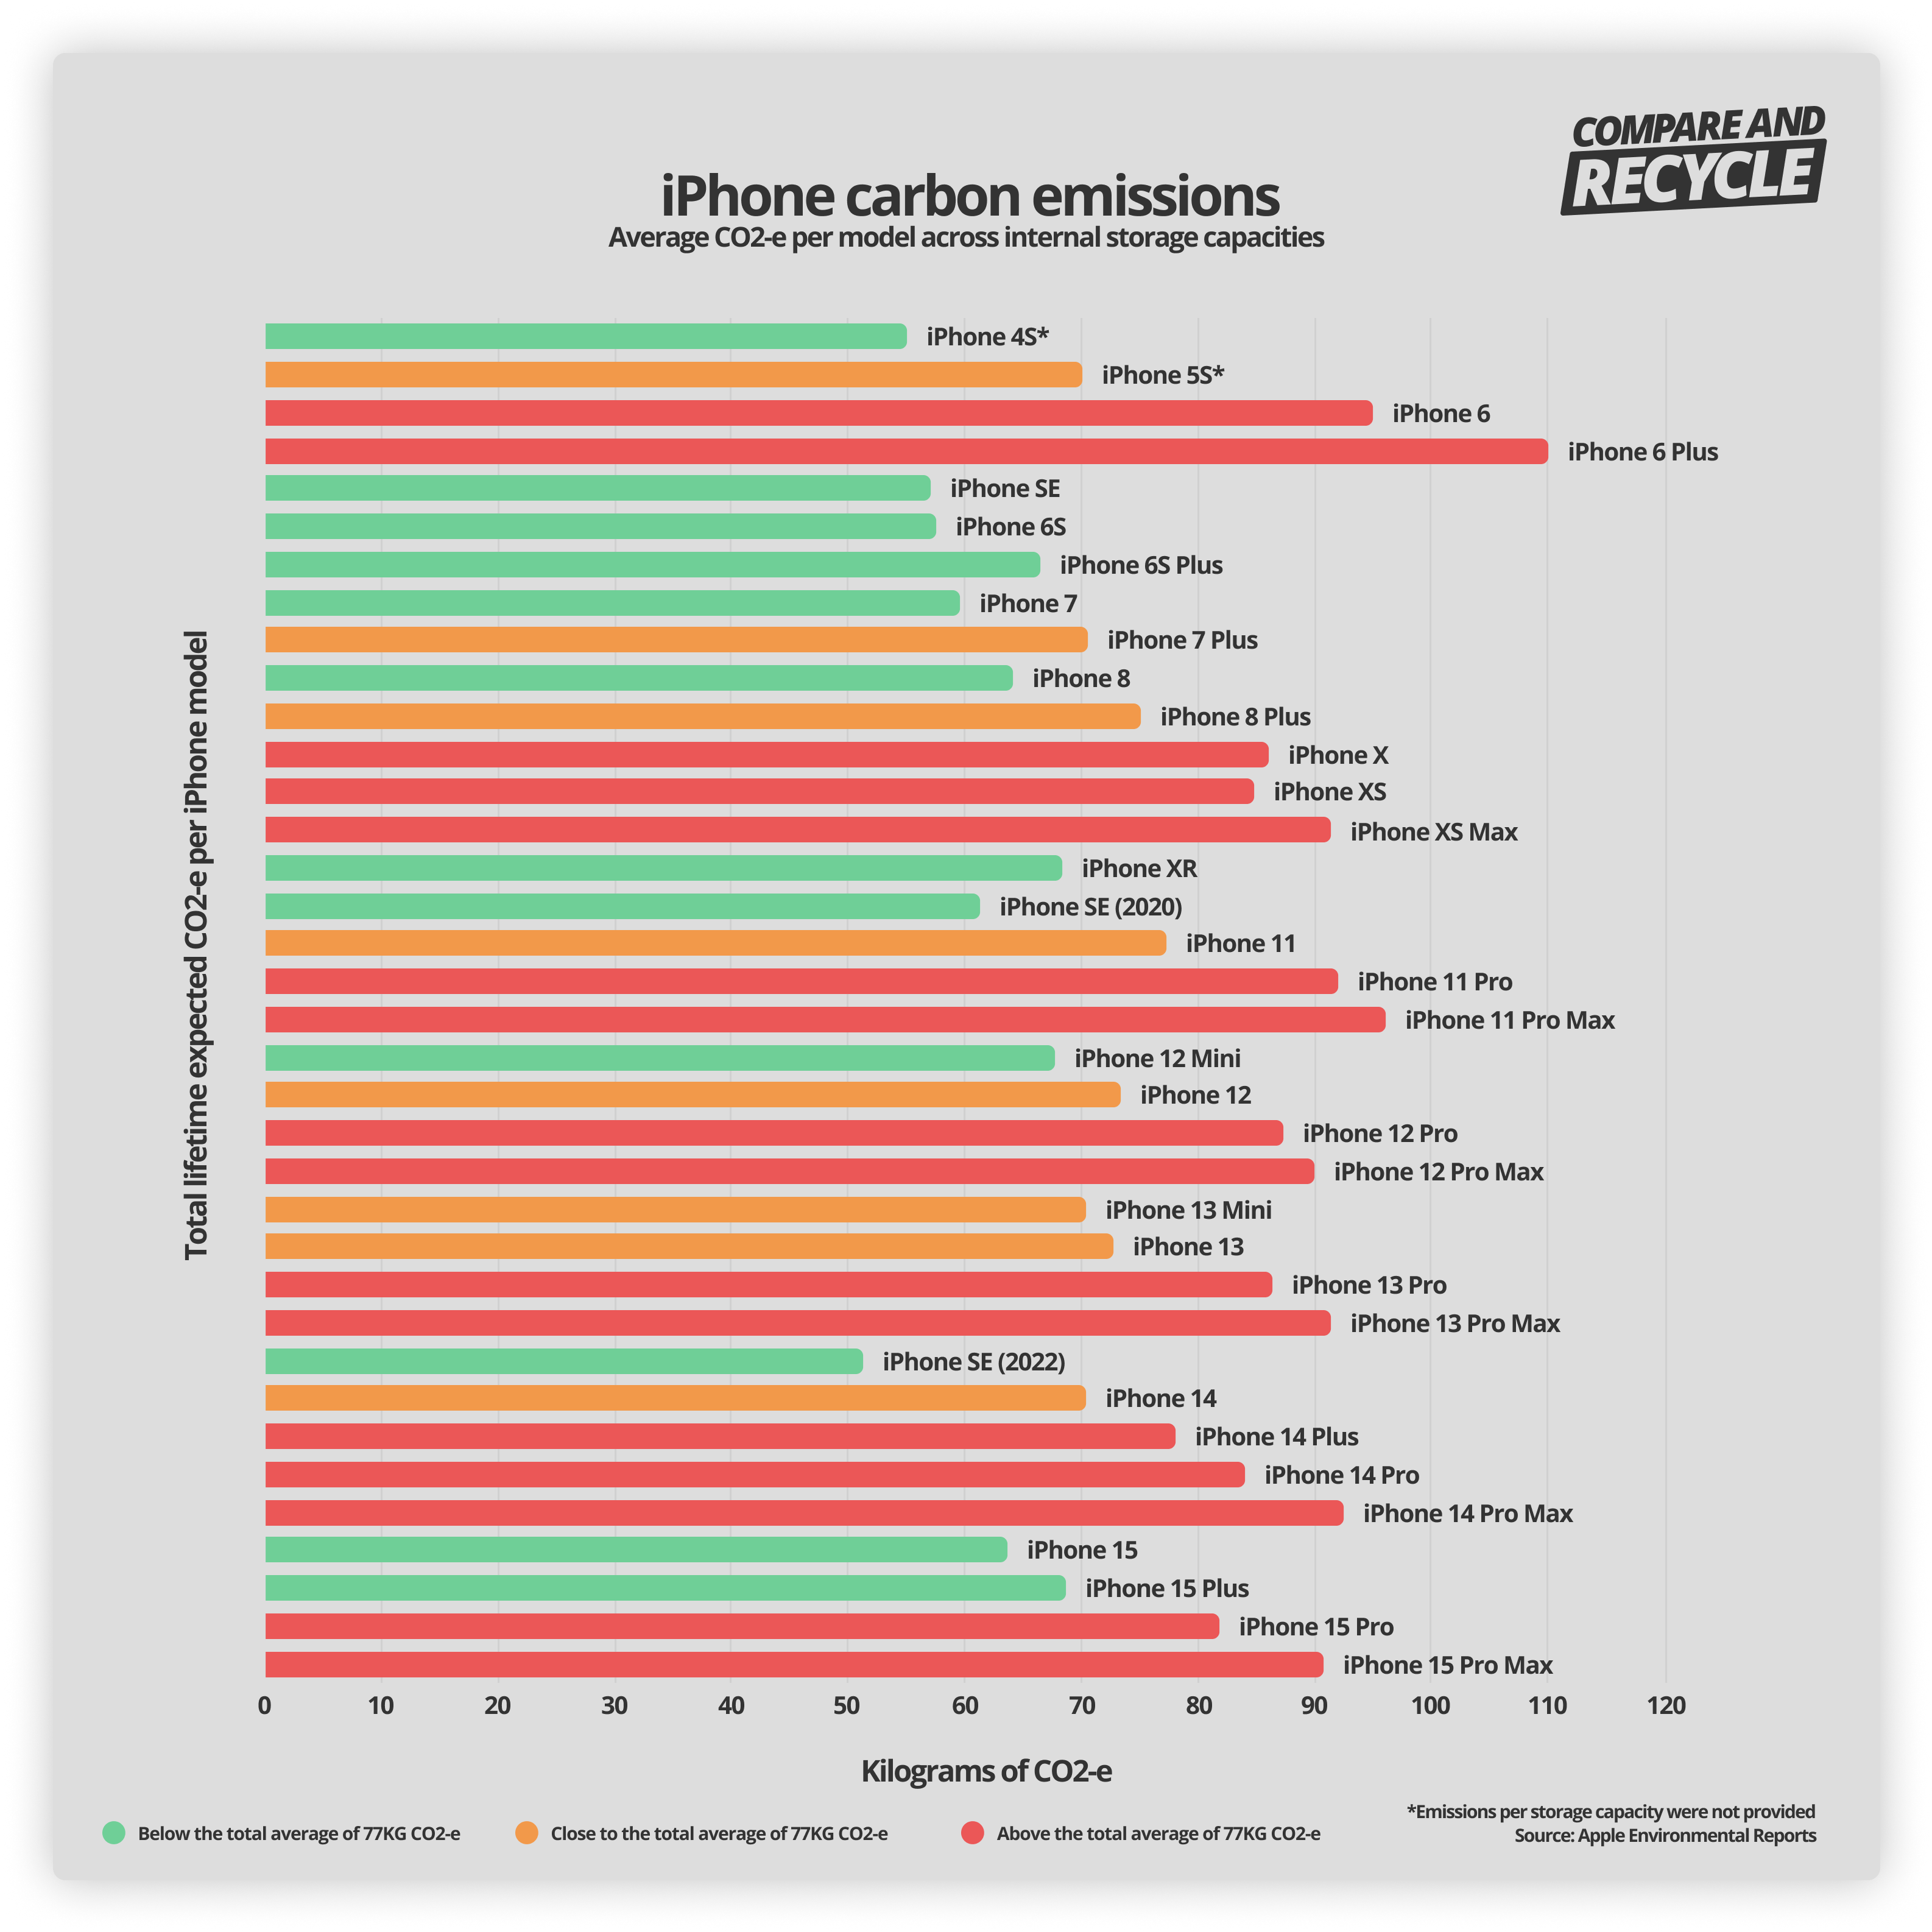 Graph showing iPhone average carbon emissions